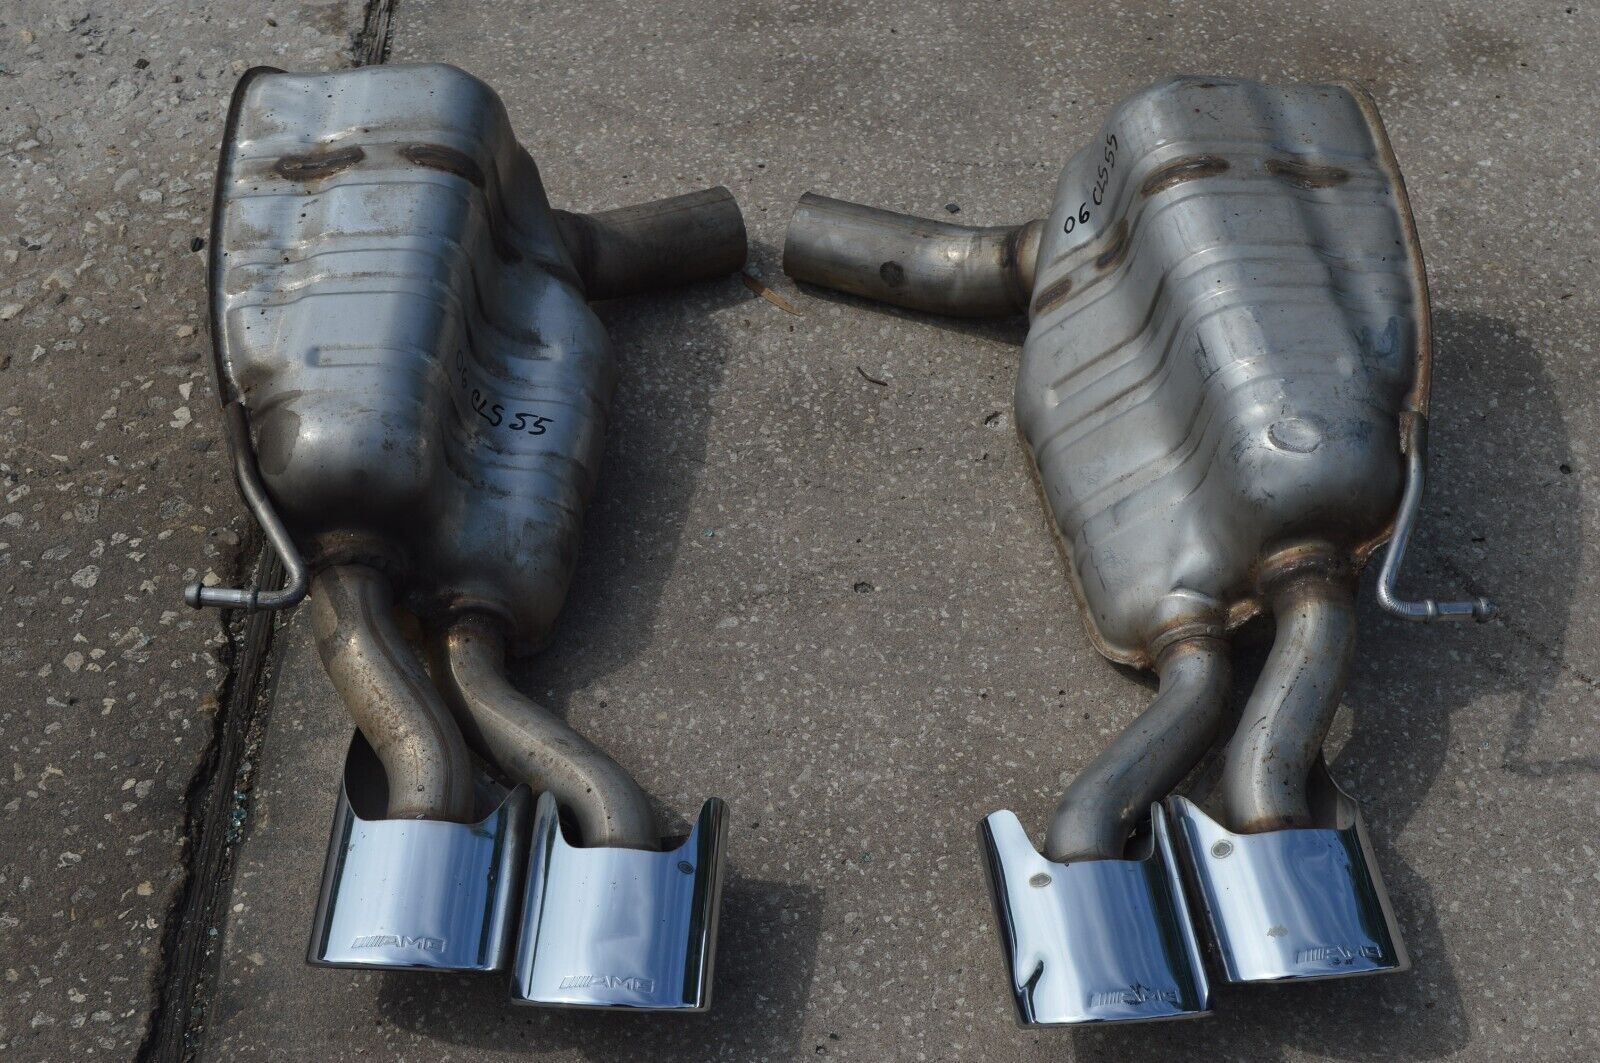 2006 W219 MERCEDES CLS55 AMG REAR LEFT & RIGHT SIDE EXHAUST MUFFLER & TIPS